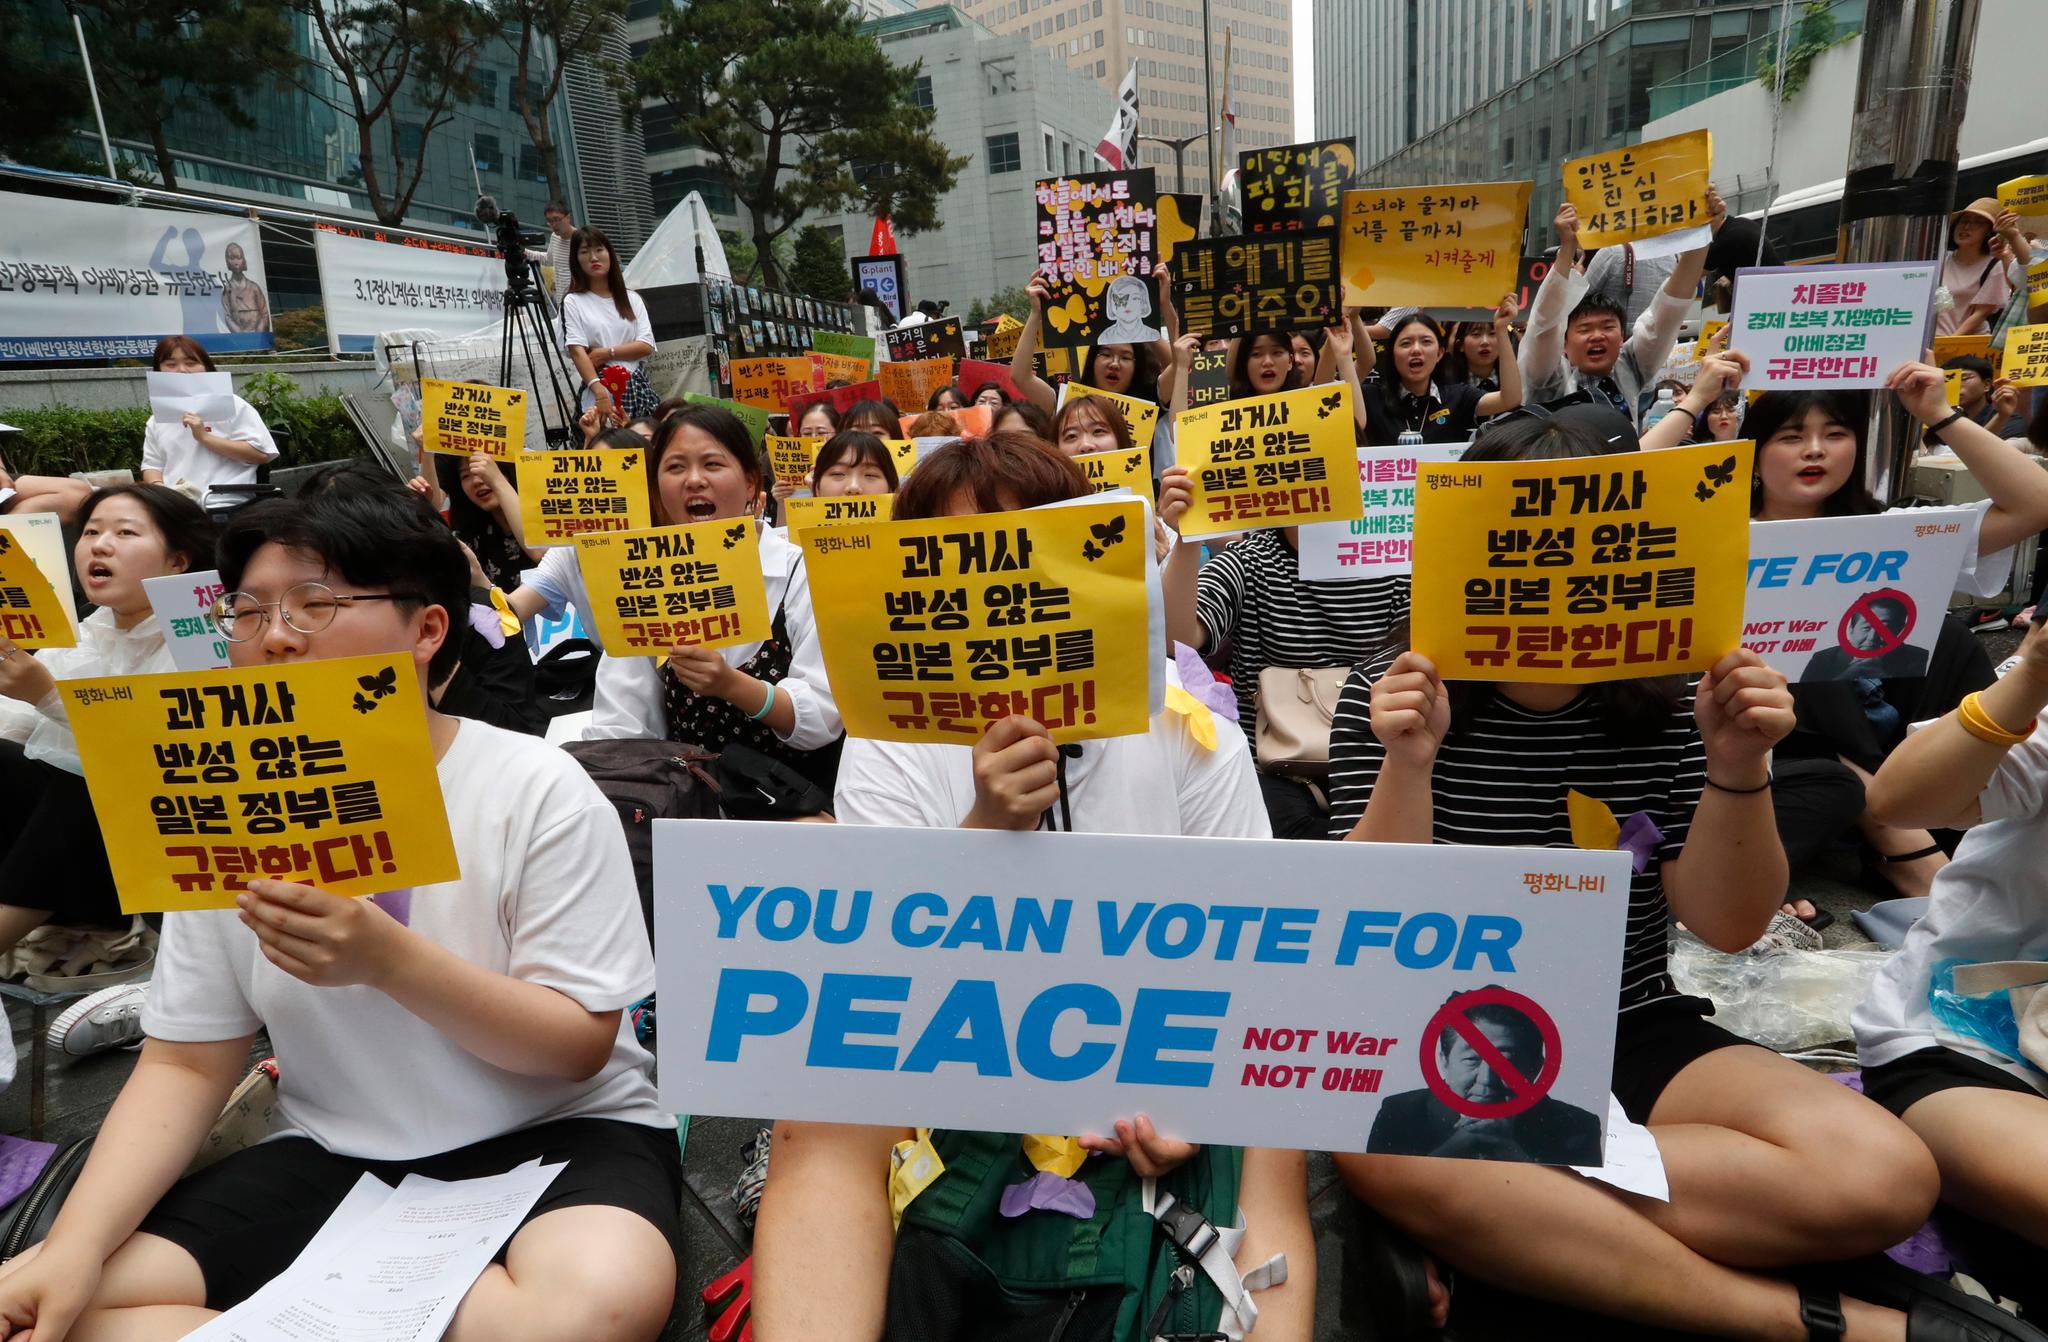 Protesters shout slogans during a rally demanding full compensation and an apology for crimes committed against Koreans during World War II by the Japanese